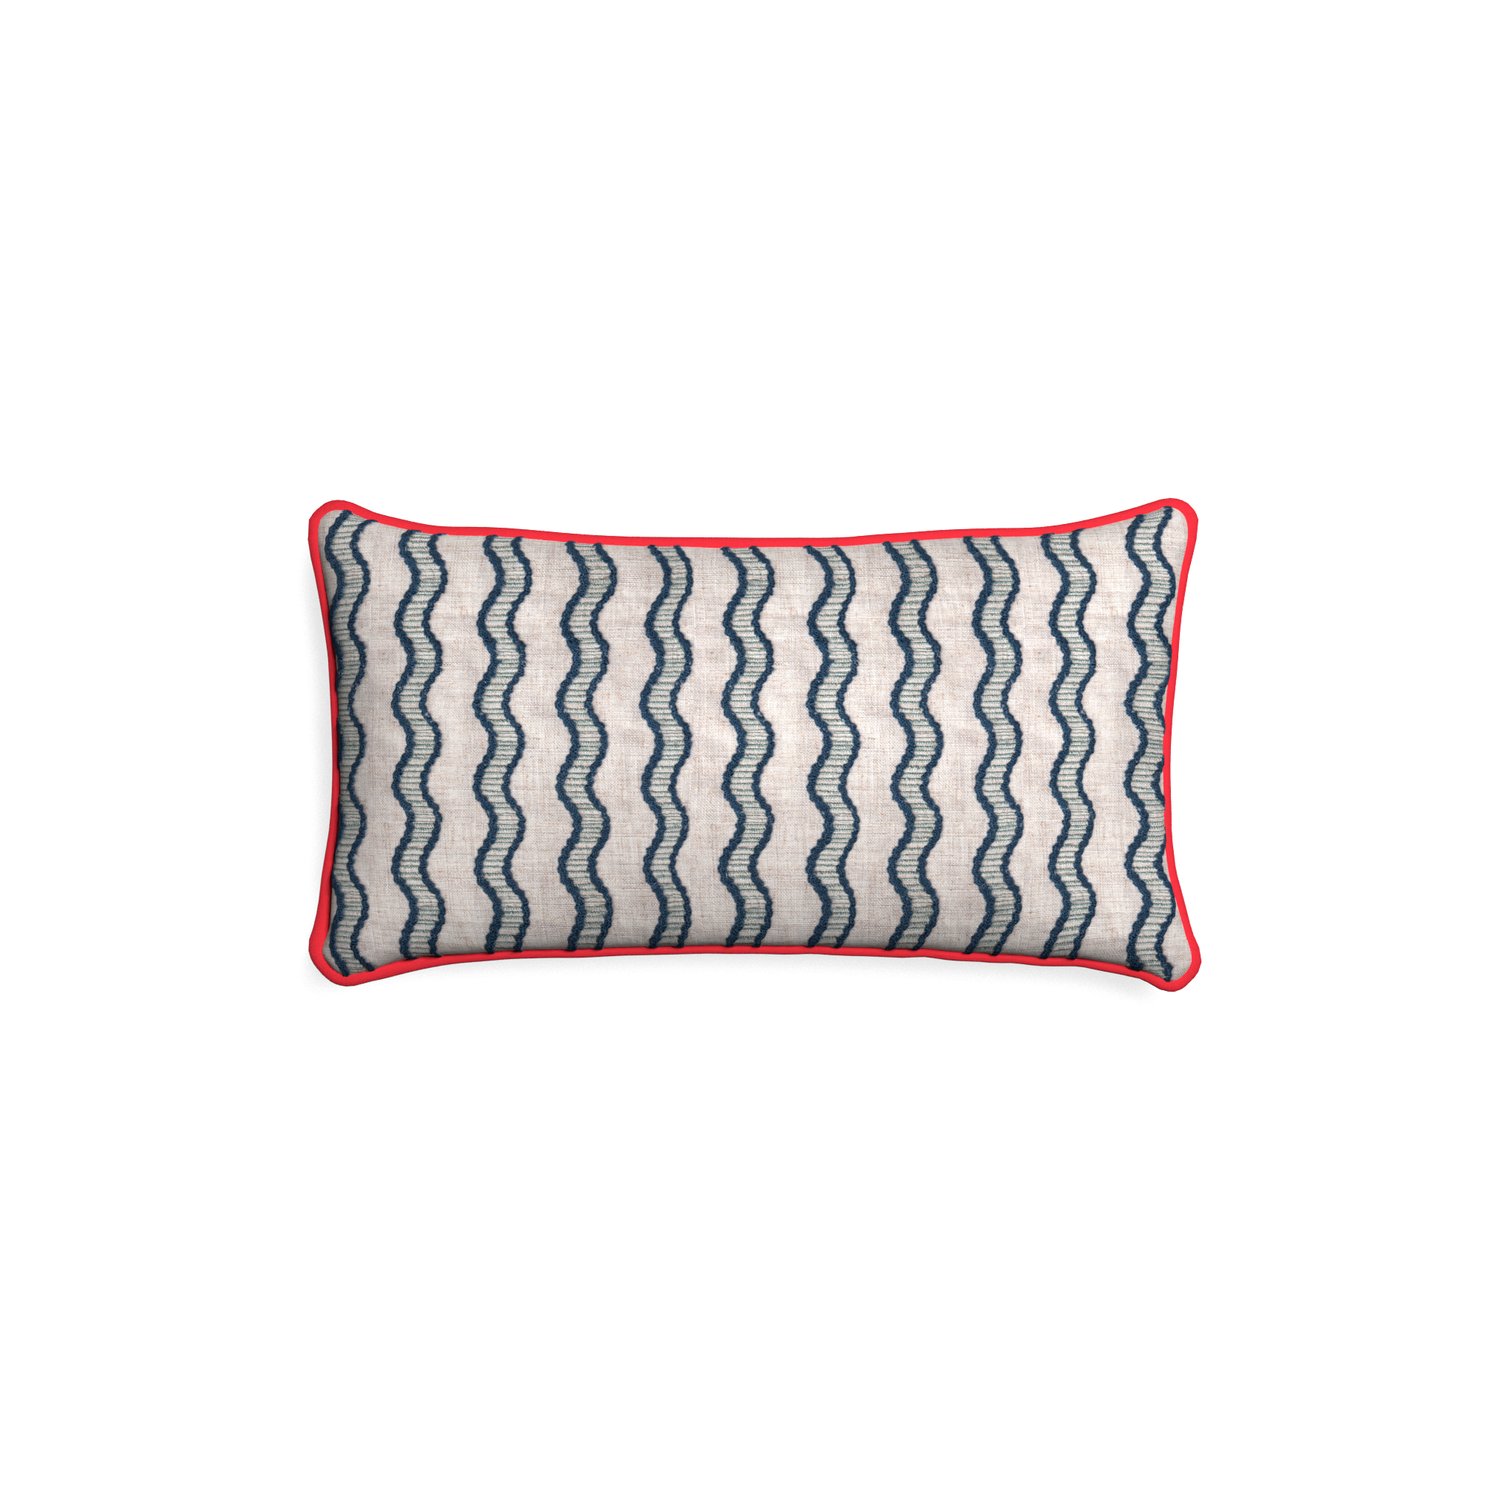 Petite-lumbar beatrice custom embroidered wavepillow with cherry piping on white background